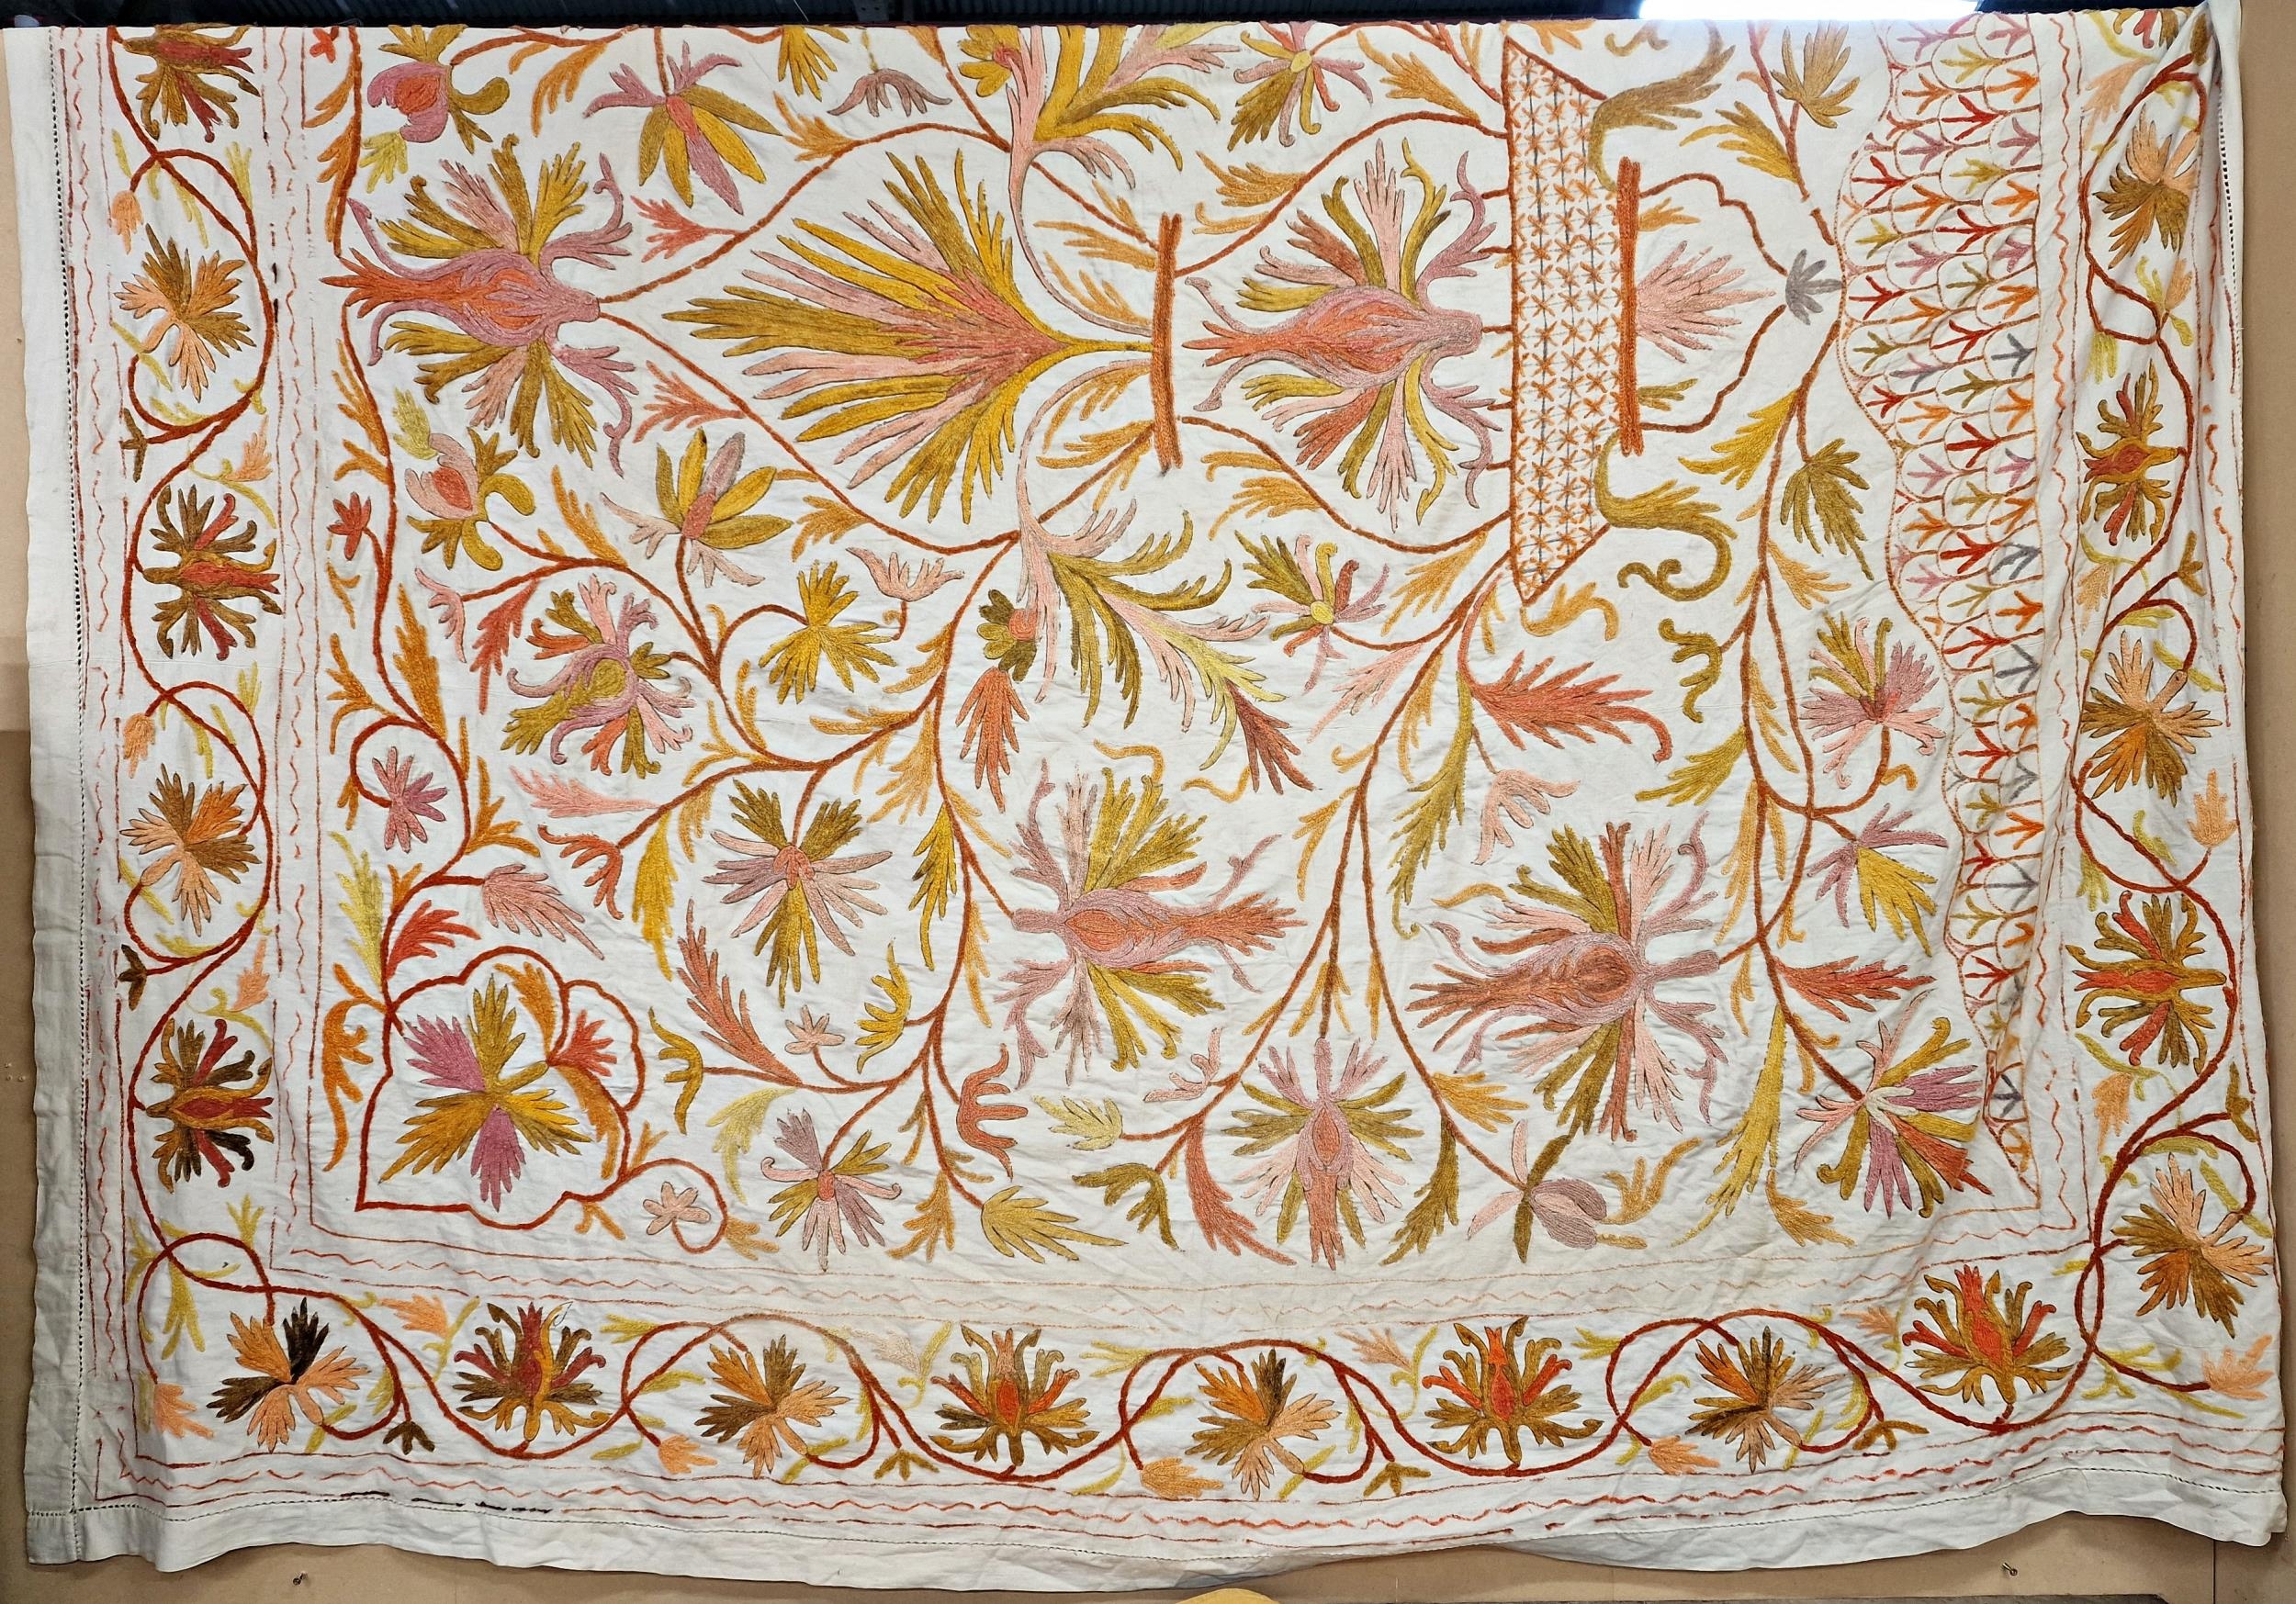 Crewel work bed cover together with a printed fabric panel, largest 240cm x 240cm (2)